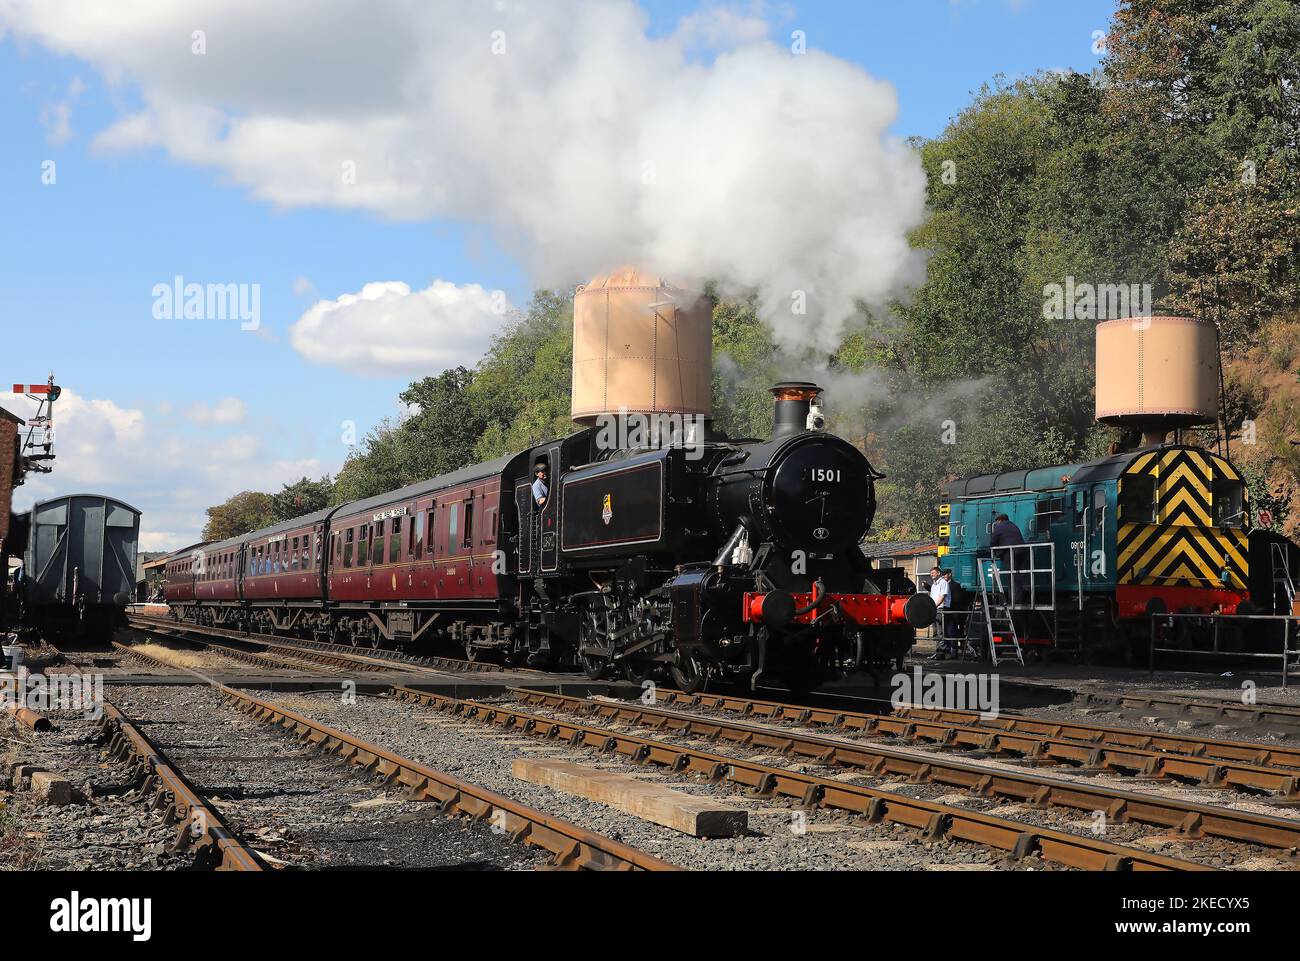 1501 heads away from Bewdley on 16.9.22. Stock Photo